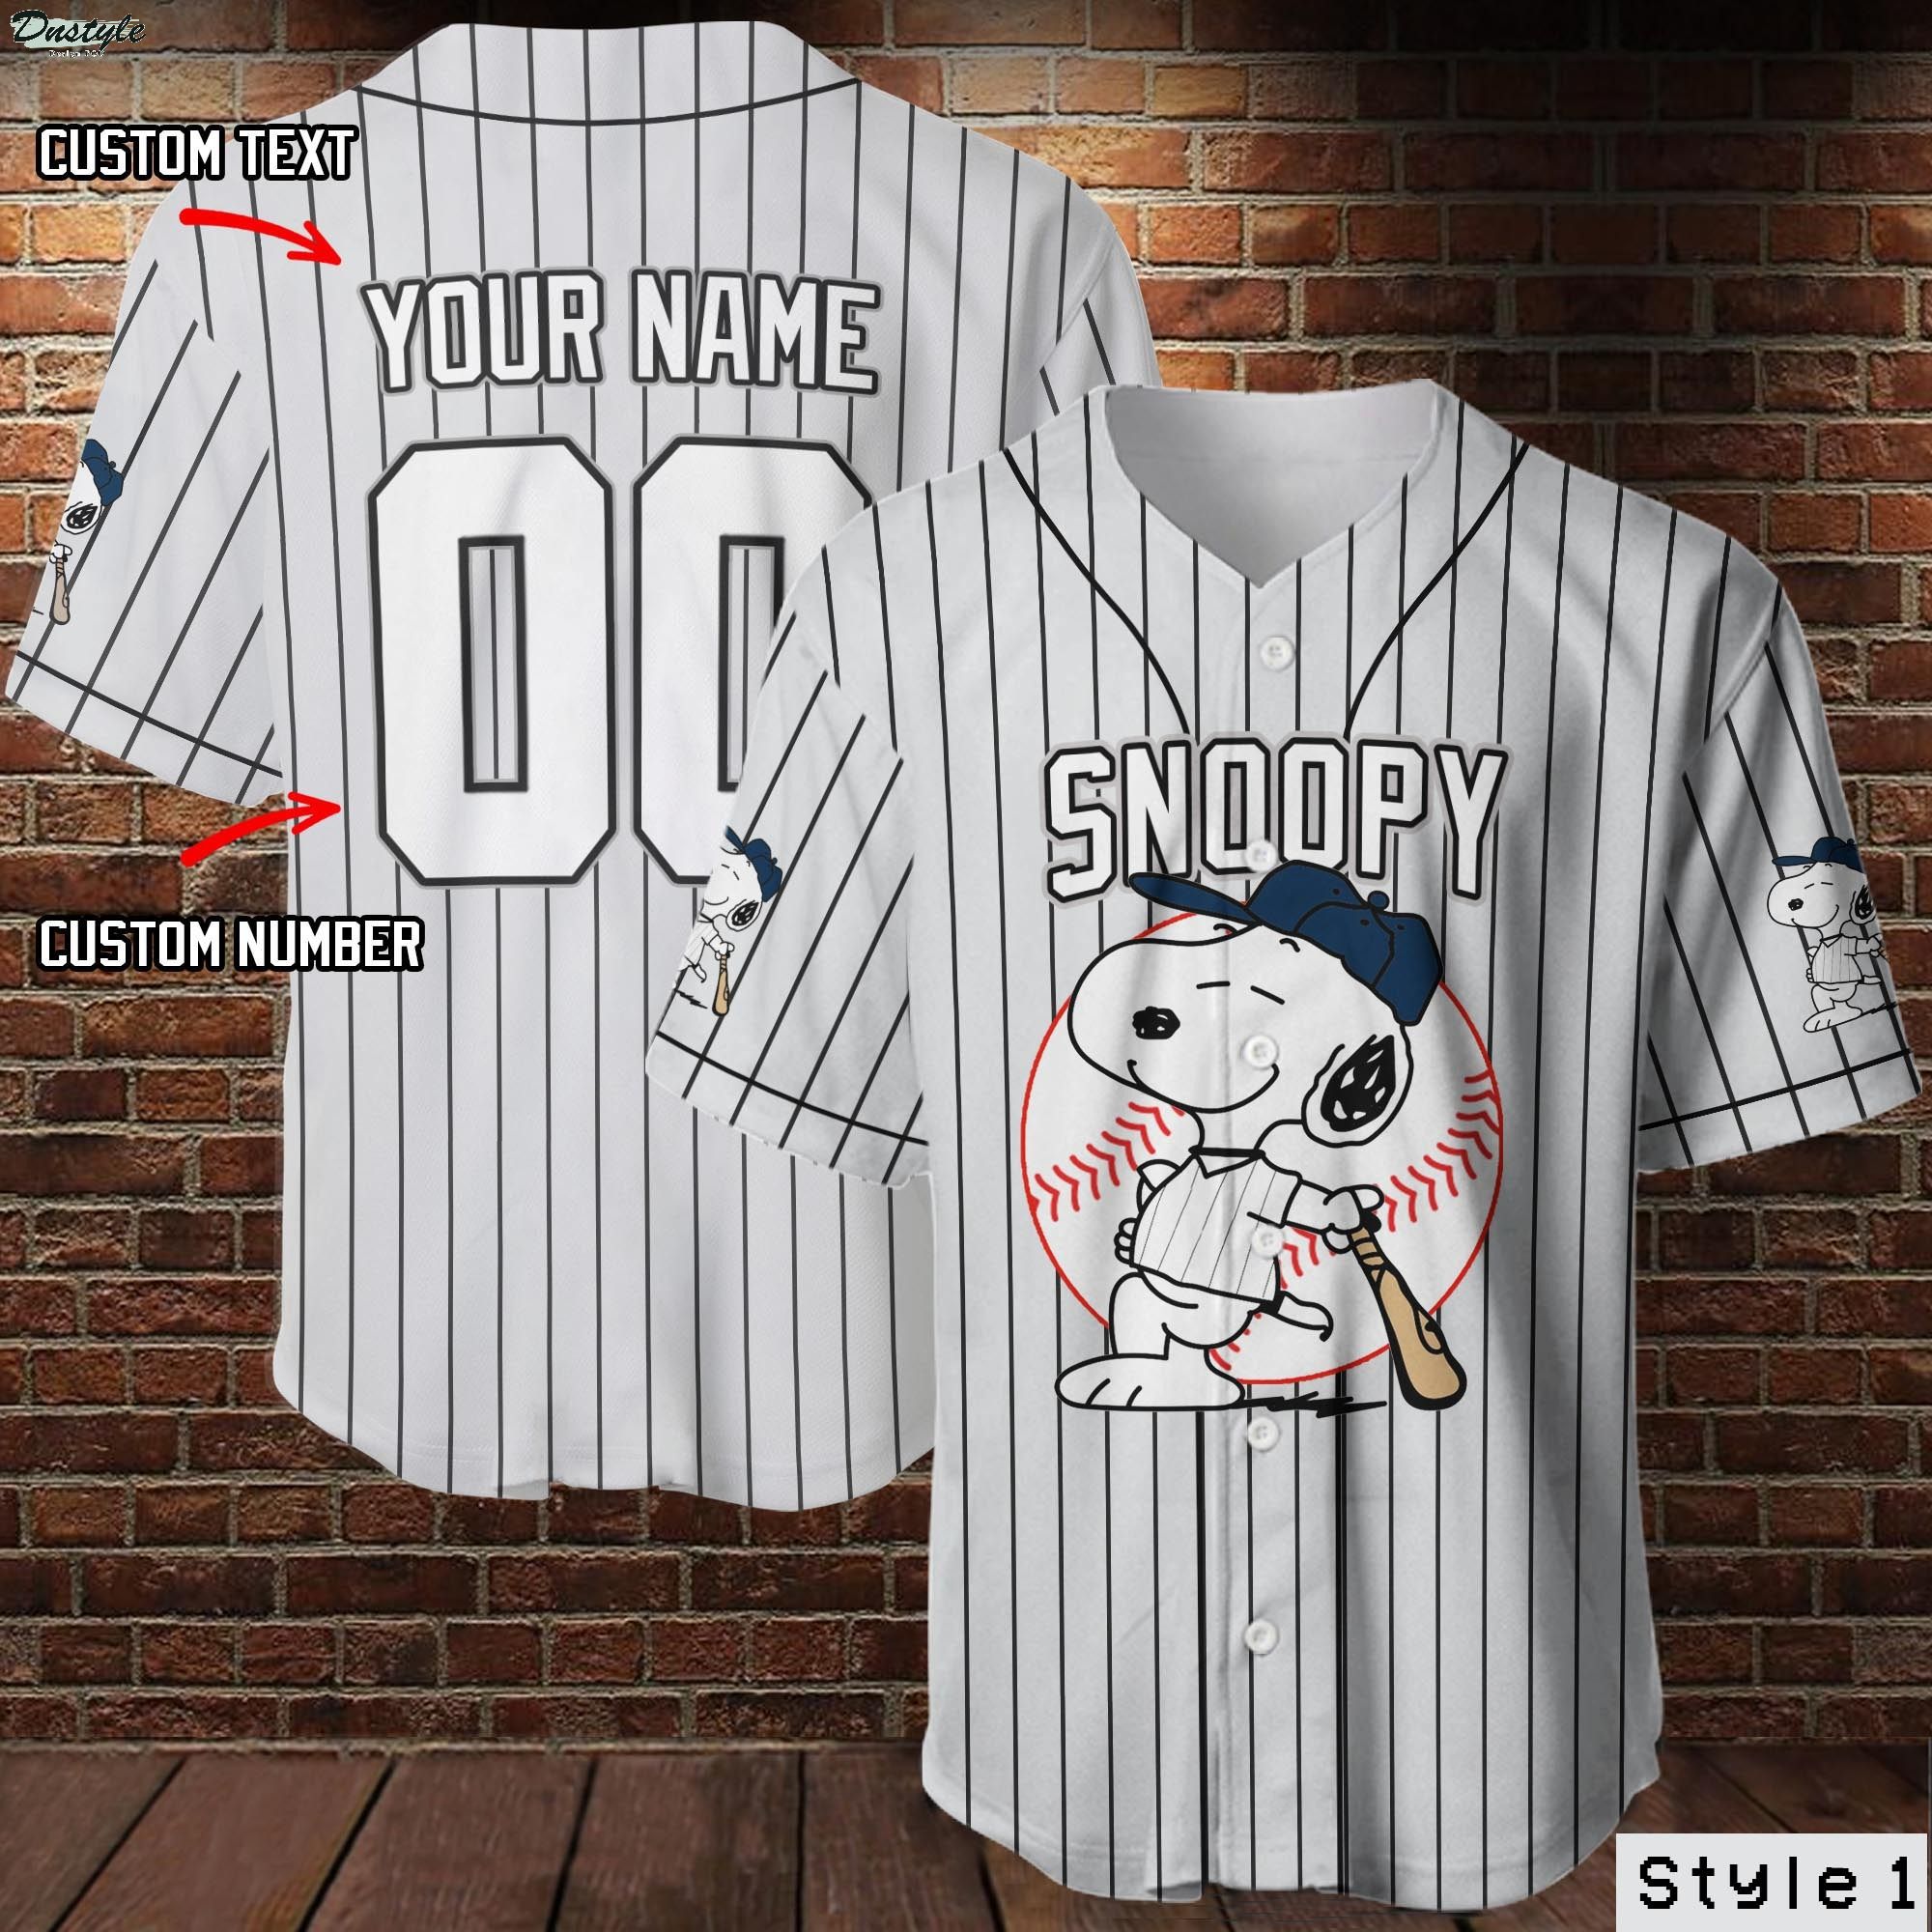 Snoopy custom name and number baseball jersey